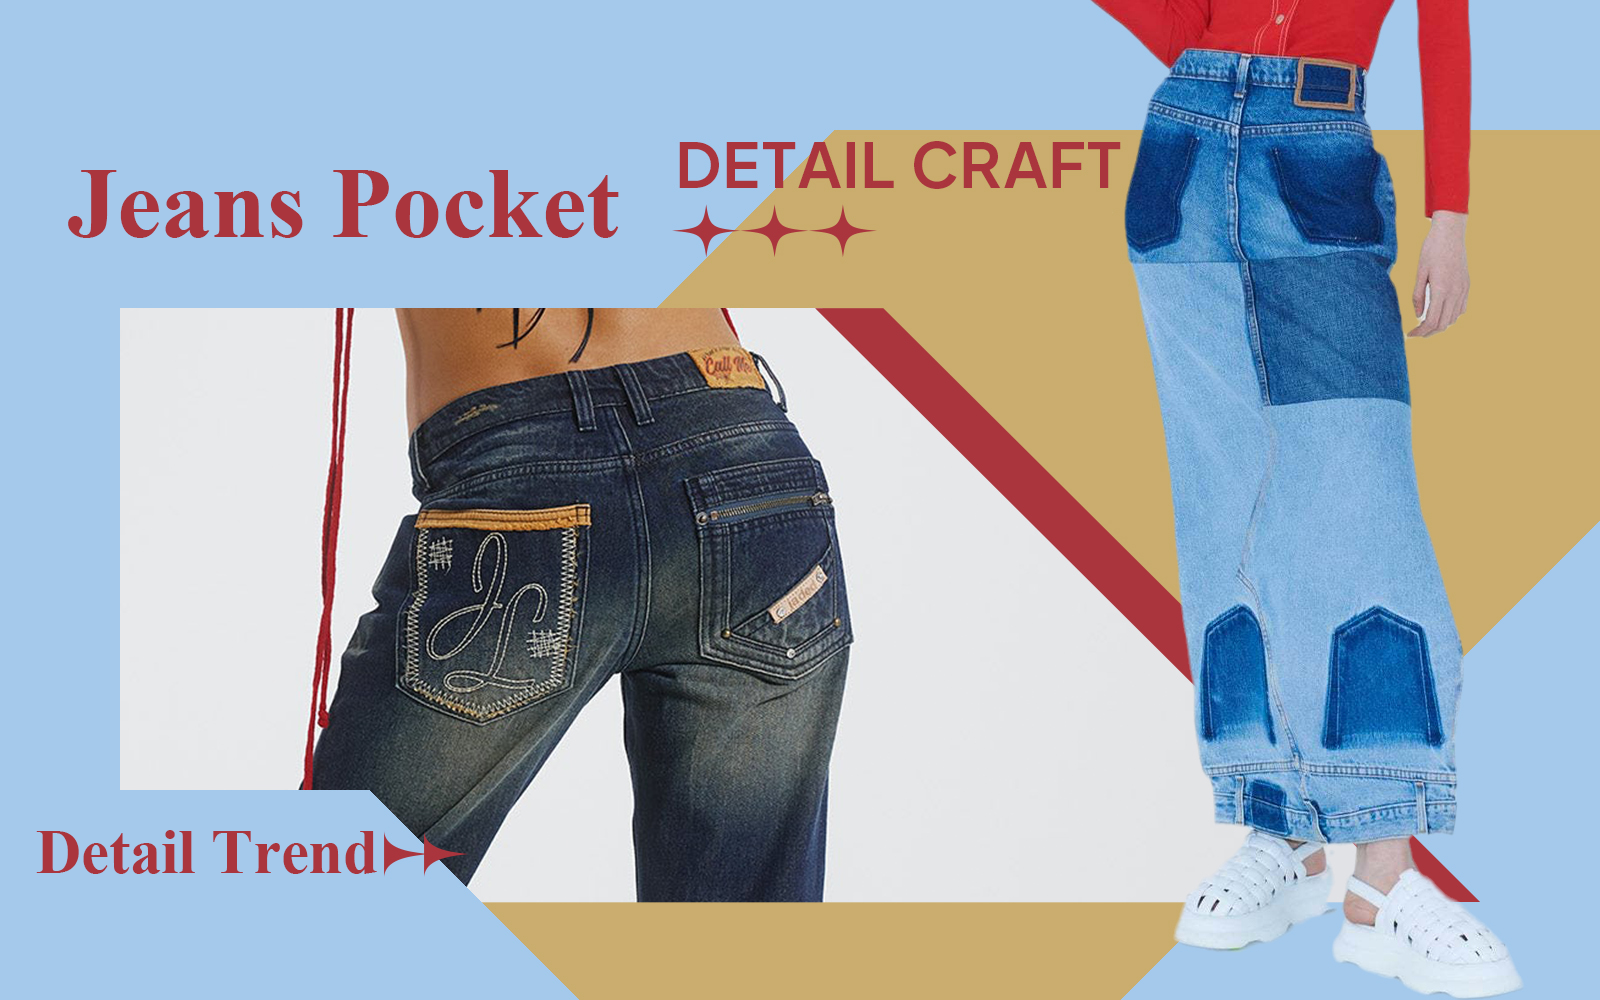 Advanced Pocket -- The Detail & Craft Trend for Jeans